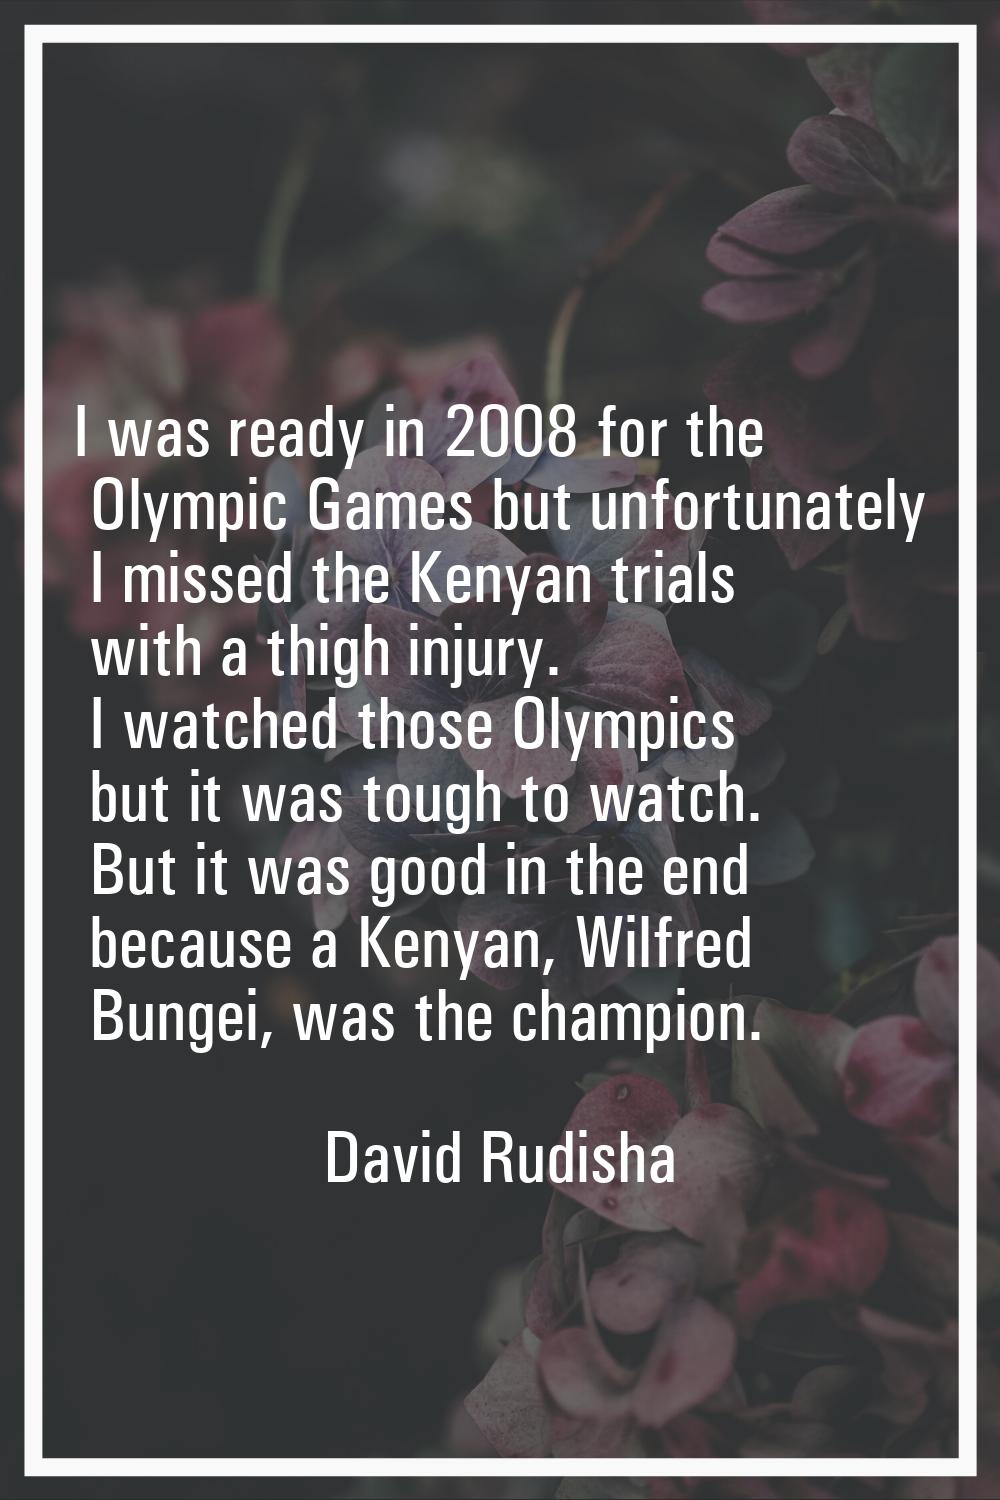 I was ready in 2008 for the Olympic Games but unfortunately I missed the Kenyan trials with a thigh